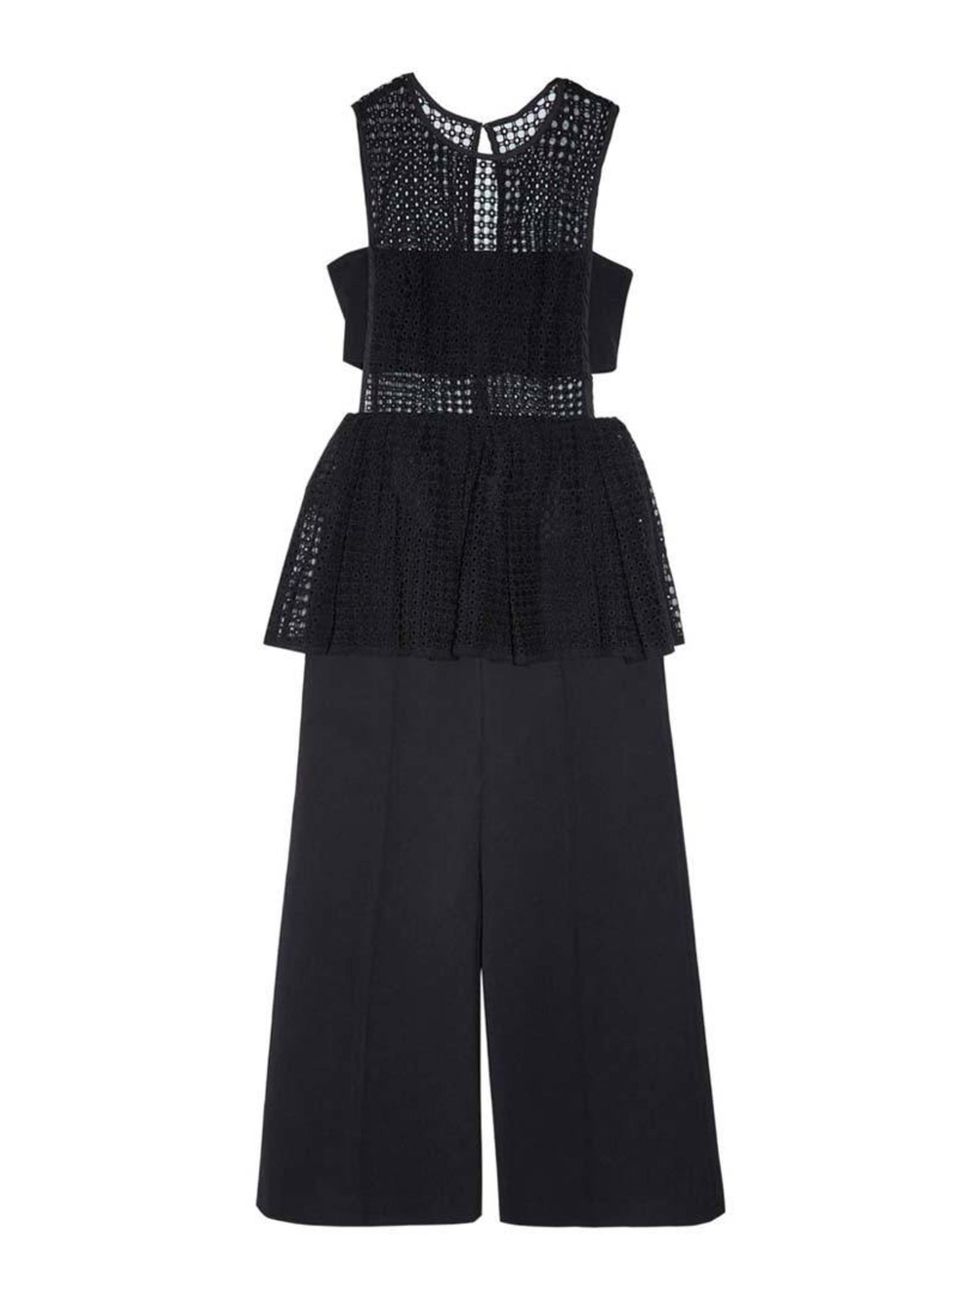 <p>This dress/jumpsuit hybrid is the answer to any tricky dress code this summer. Cocktail? Why, of course. Black tie? Just add courts.</p>

<p><a href="http://www.elleuk.com/fashion/what-to-wear/elle-edits-jumpsuits-how-to-wear" target="_blank">Check out